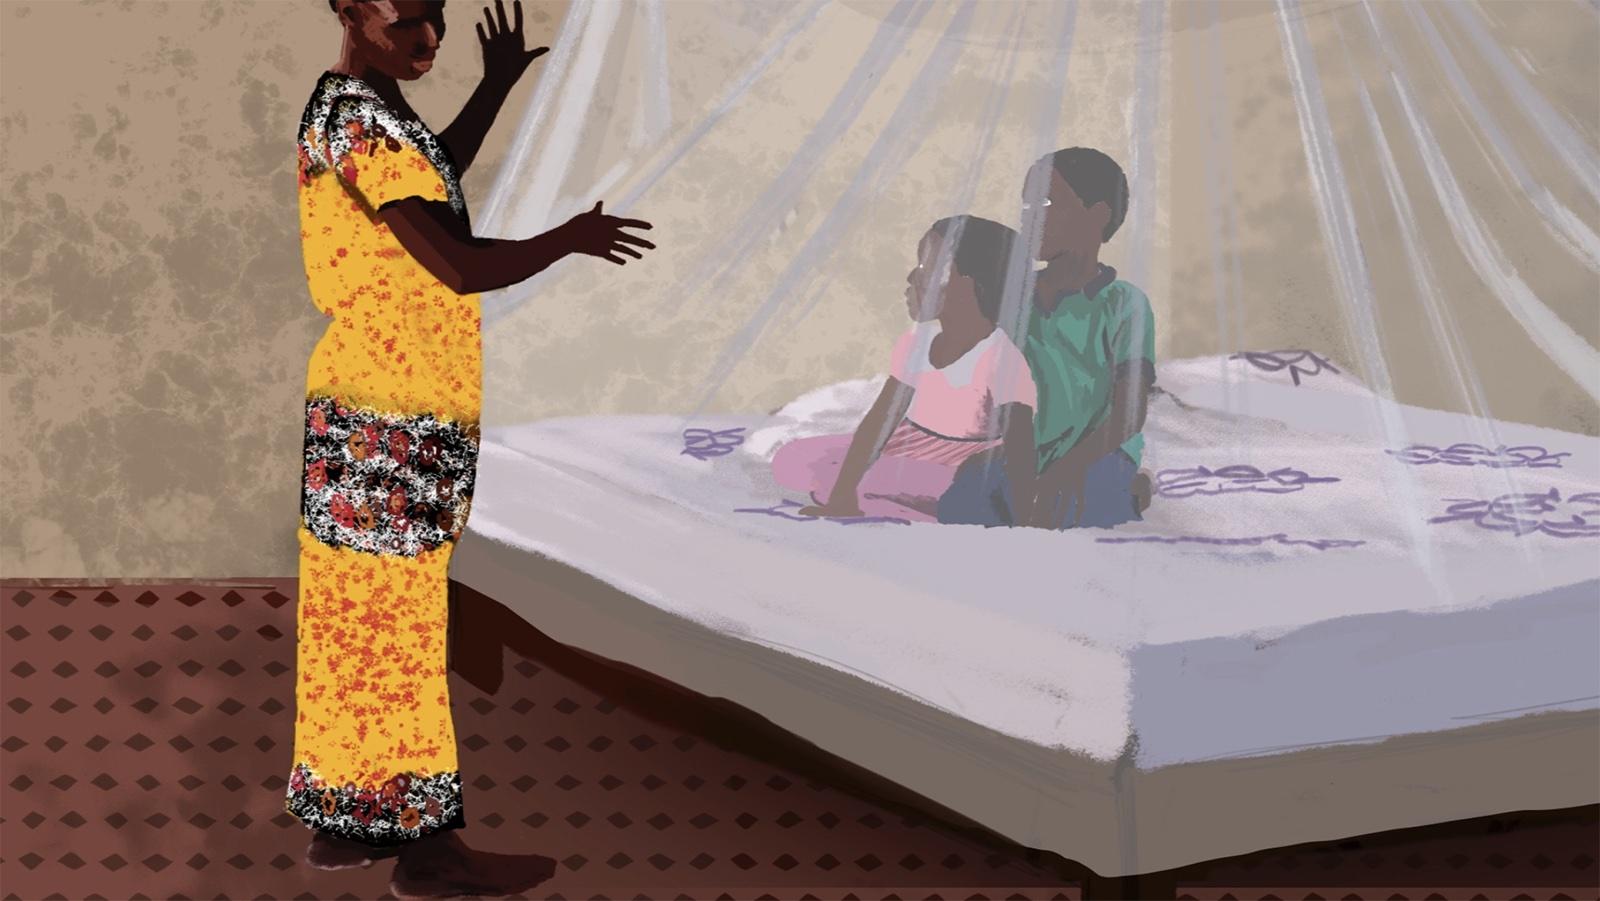 A mother standing by a bed with a bed net over it. Two children sitting on the bed.